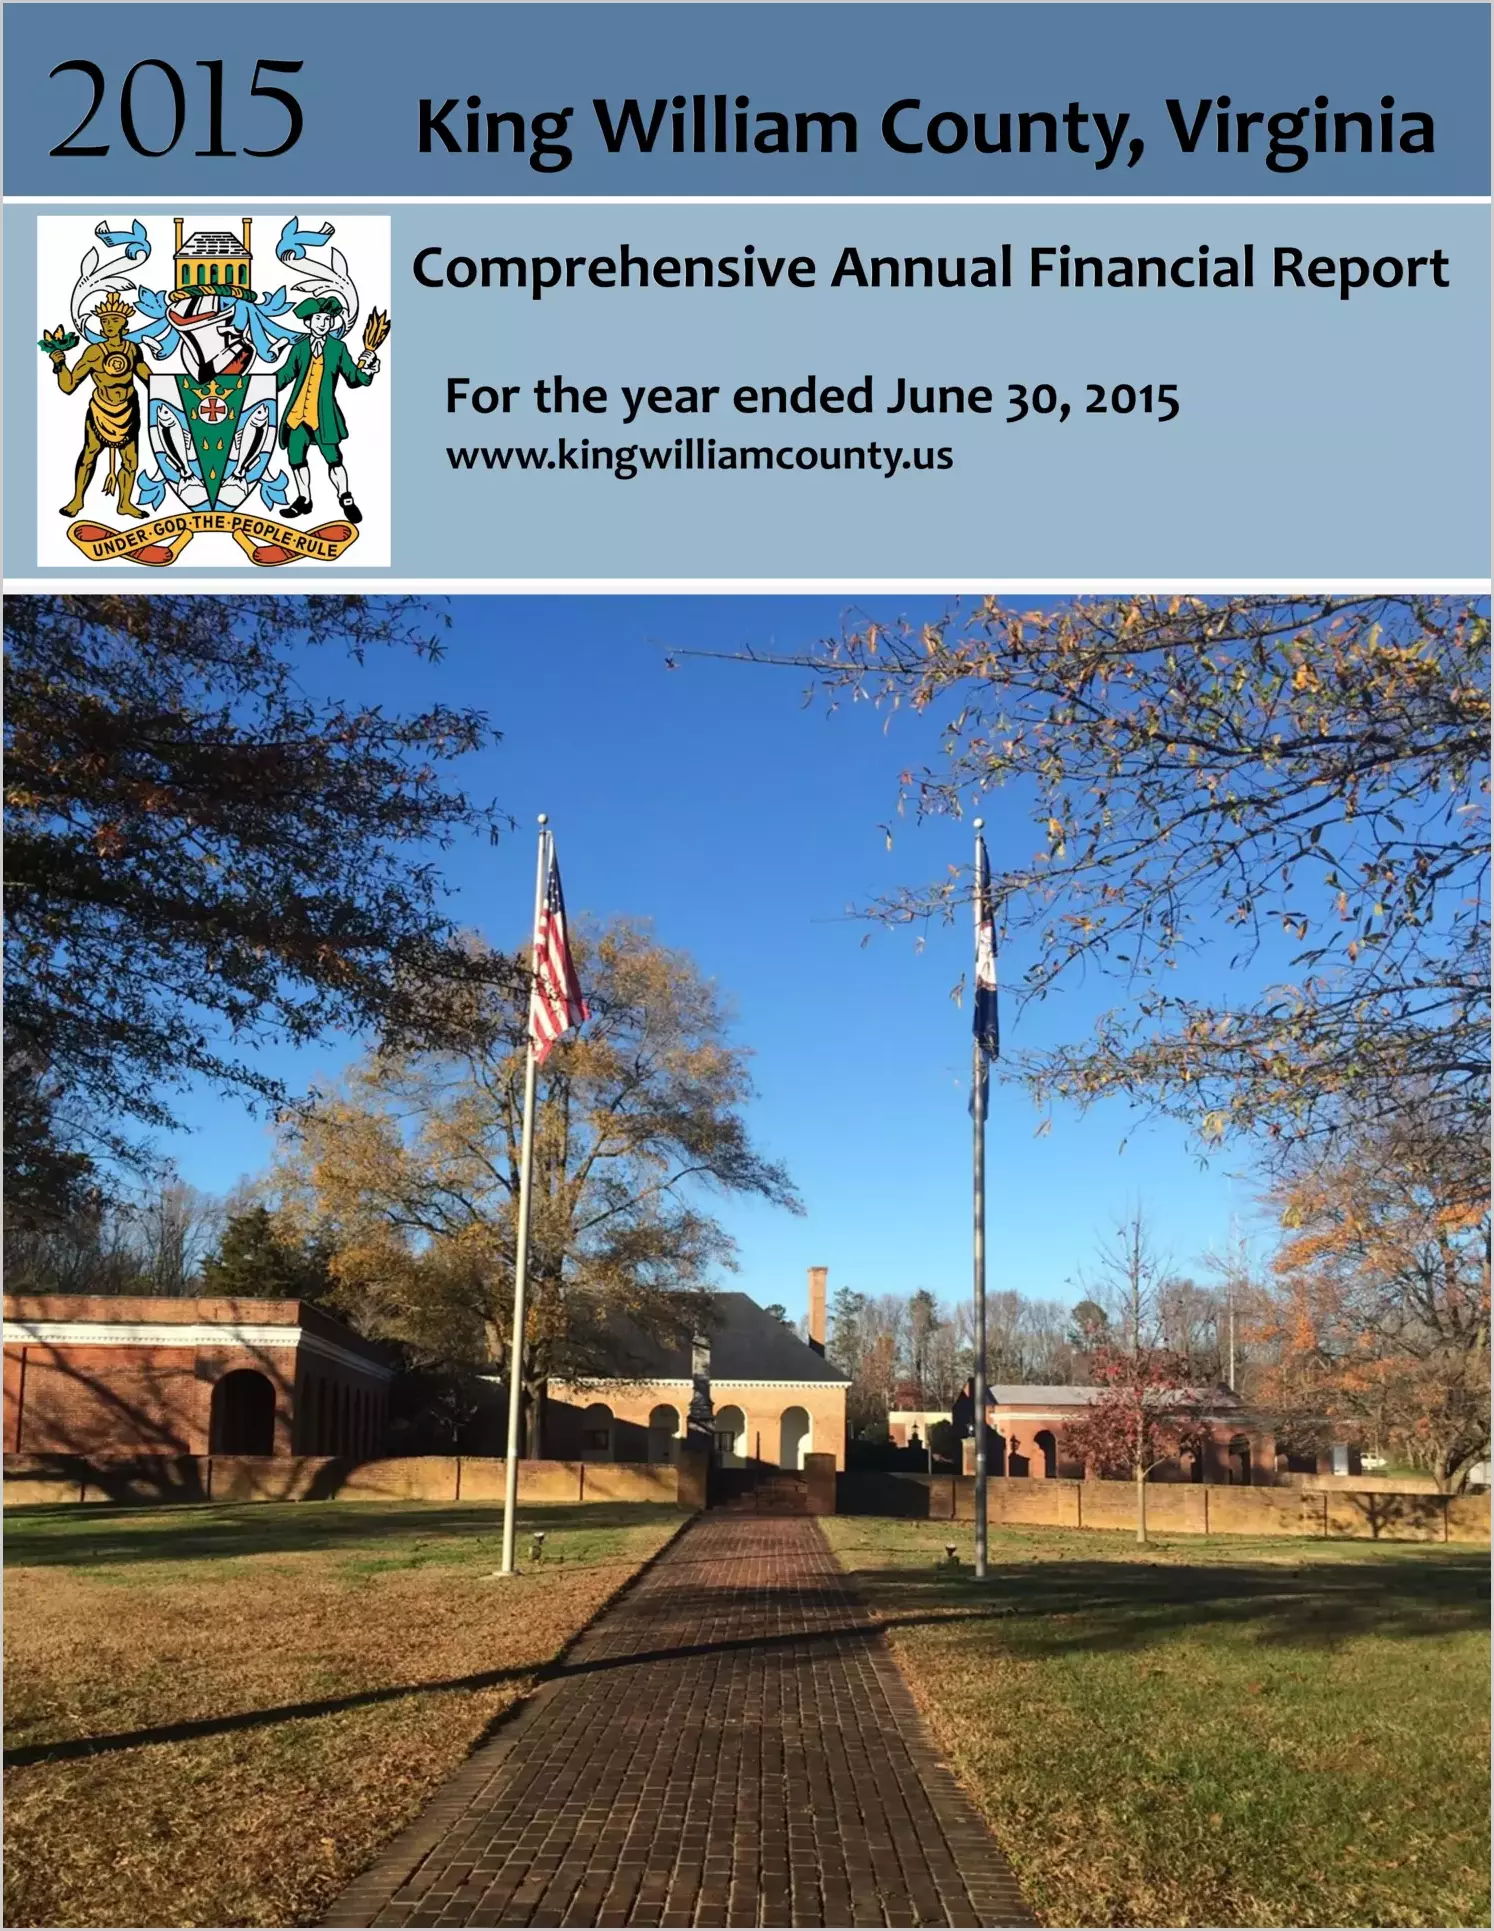 2015 Annual Financial Report for County of King William